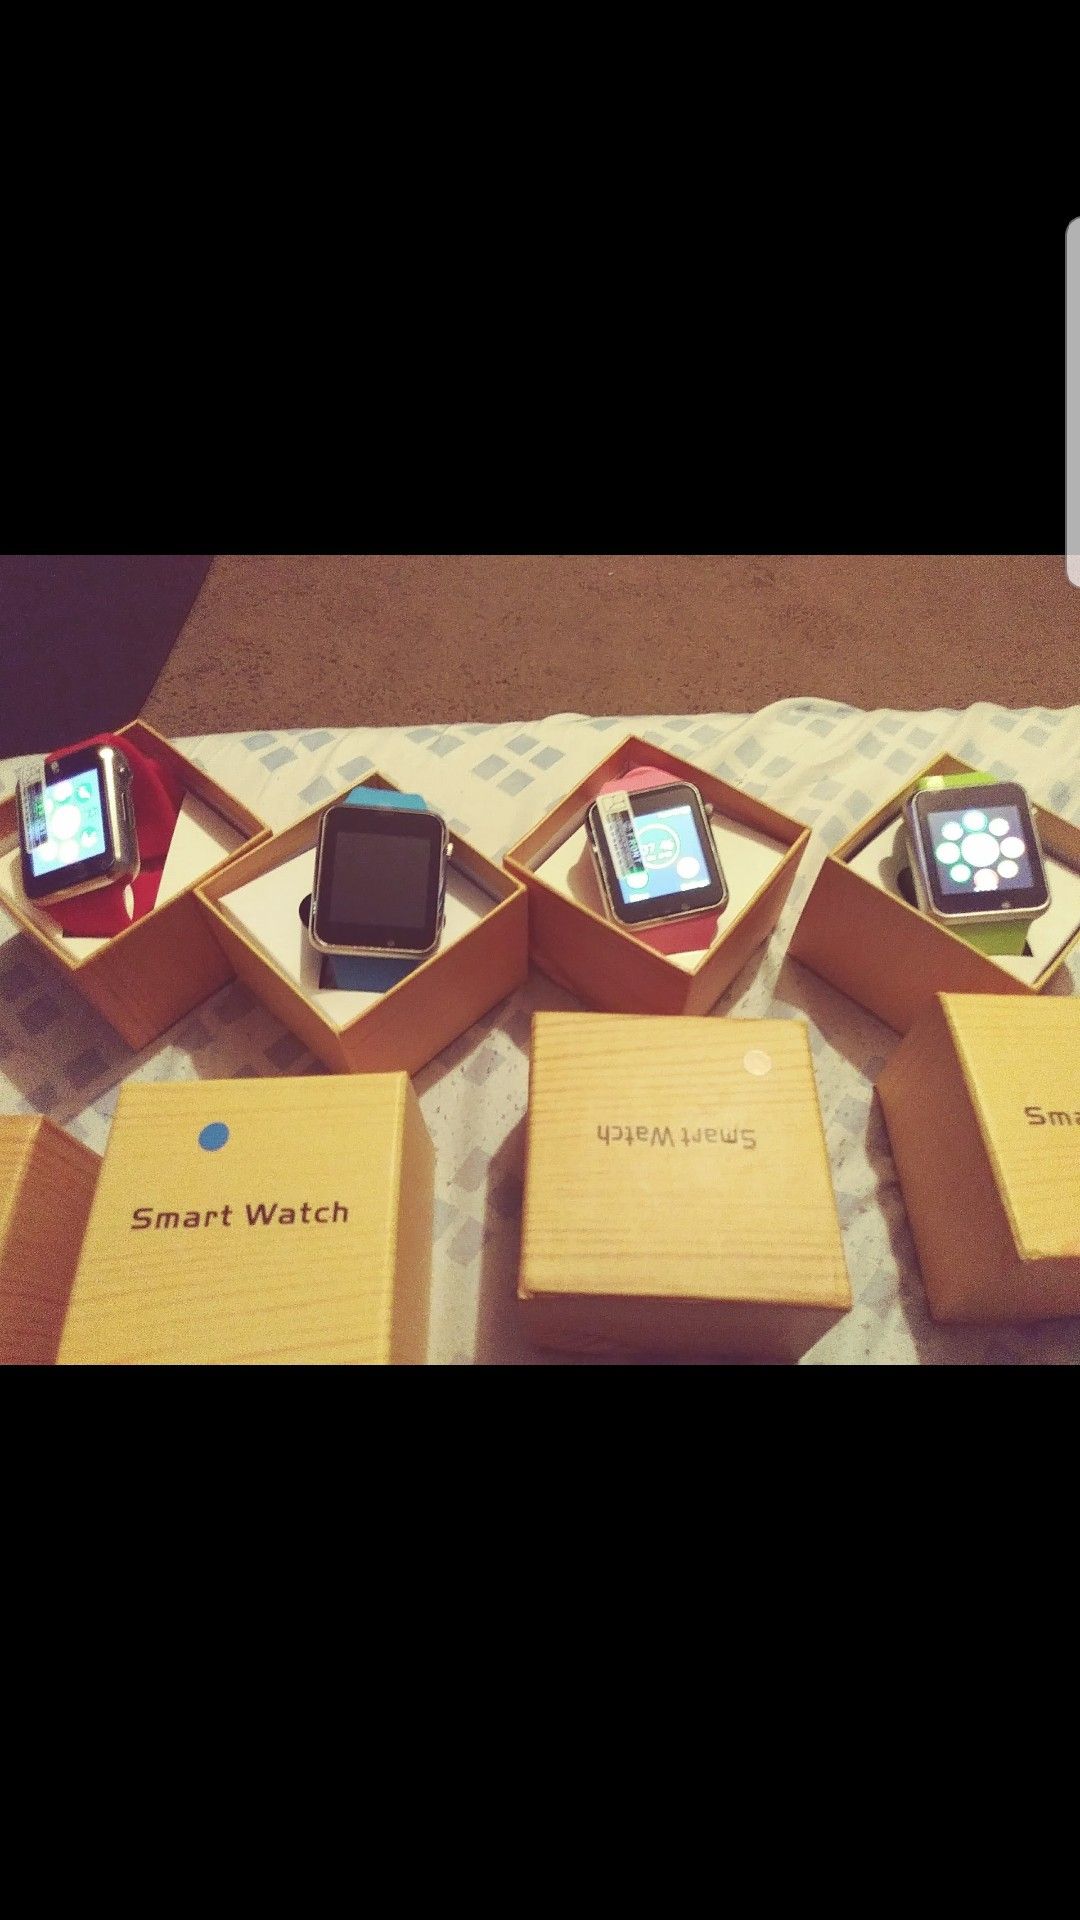 Brand new smartphone Watches with camera